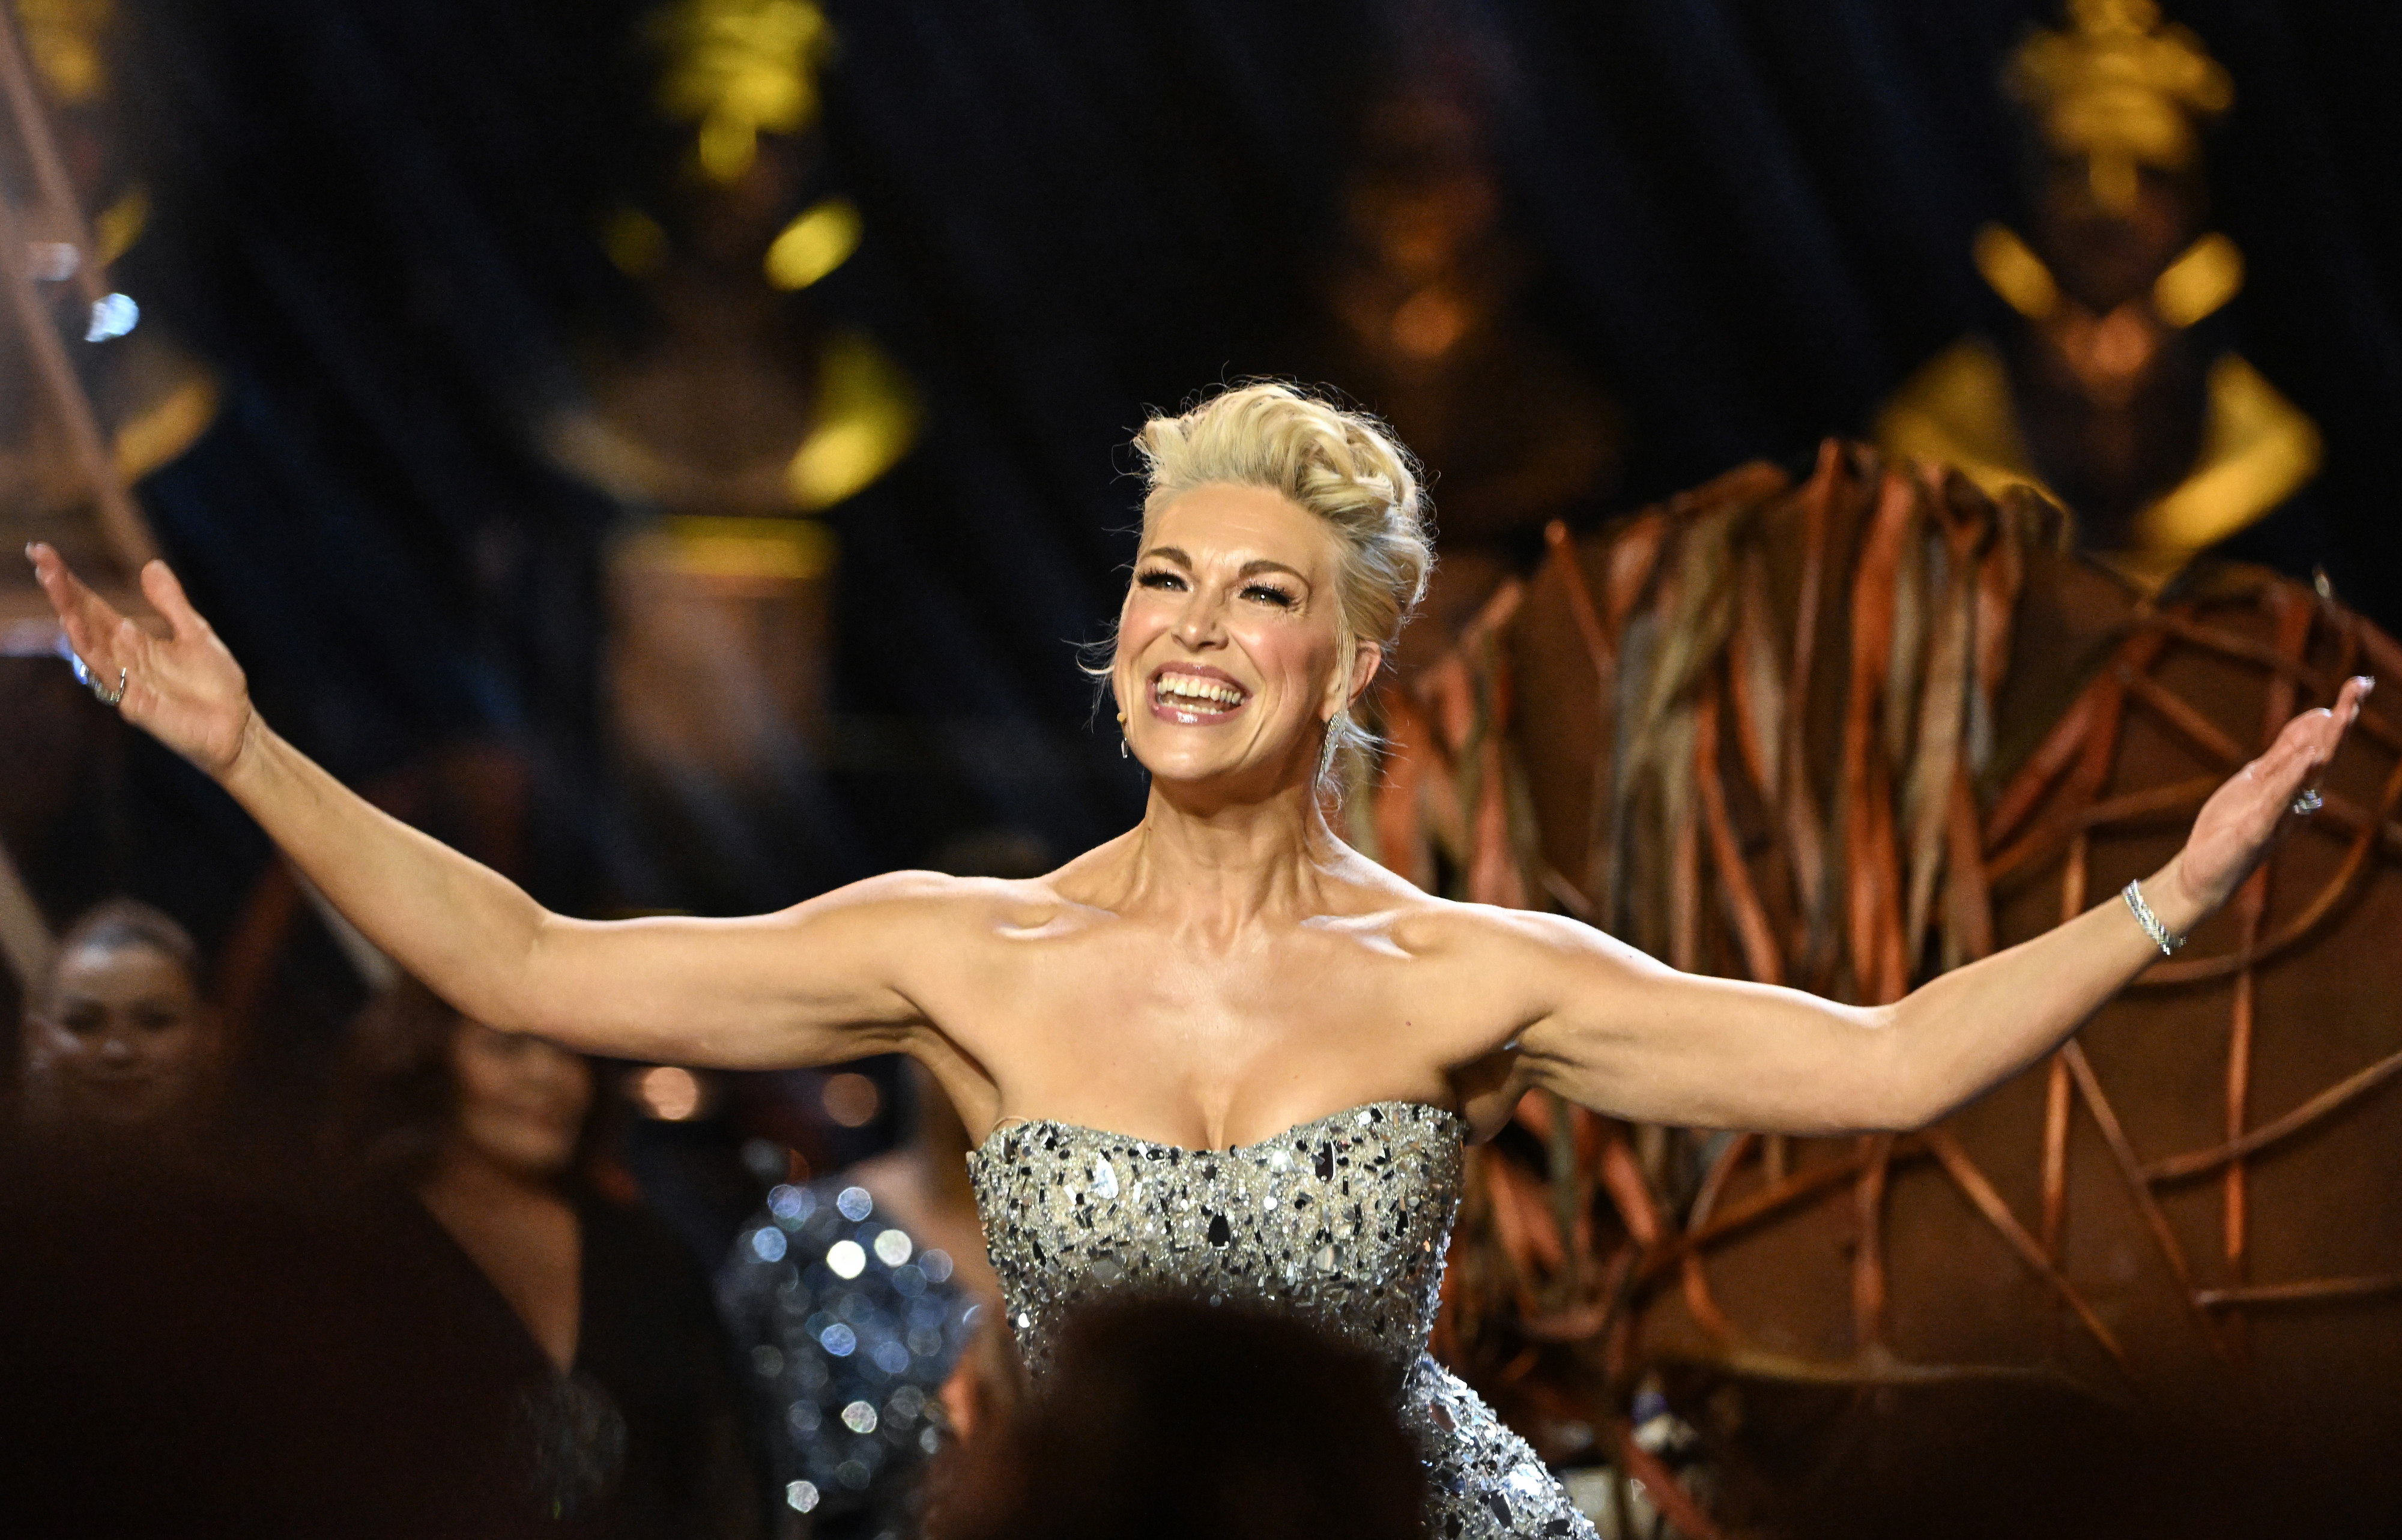 Hannah Waddingham on stage with arms outstretched, wearing a strapless, embellished gown, expressing joy